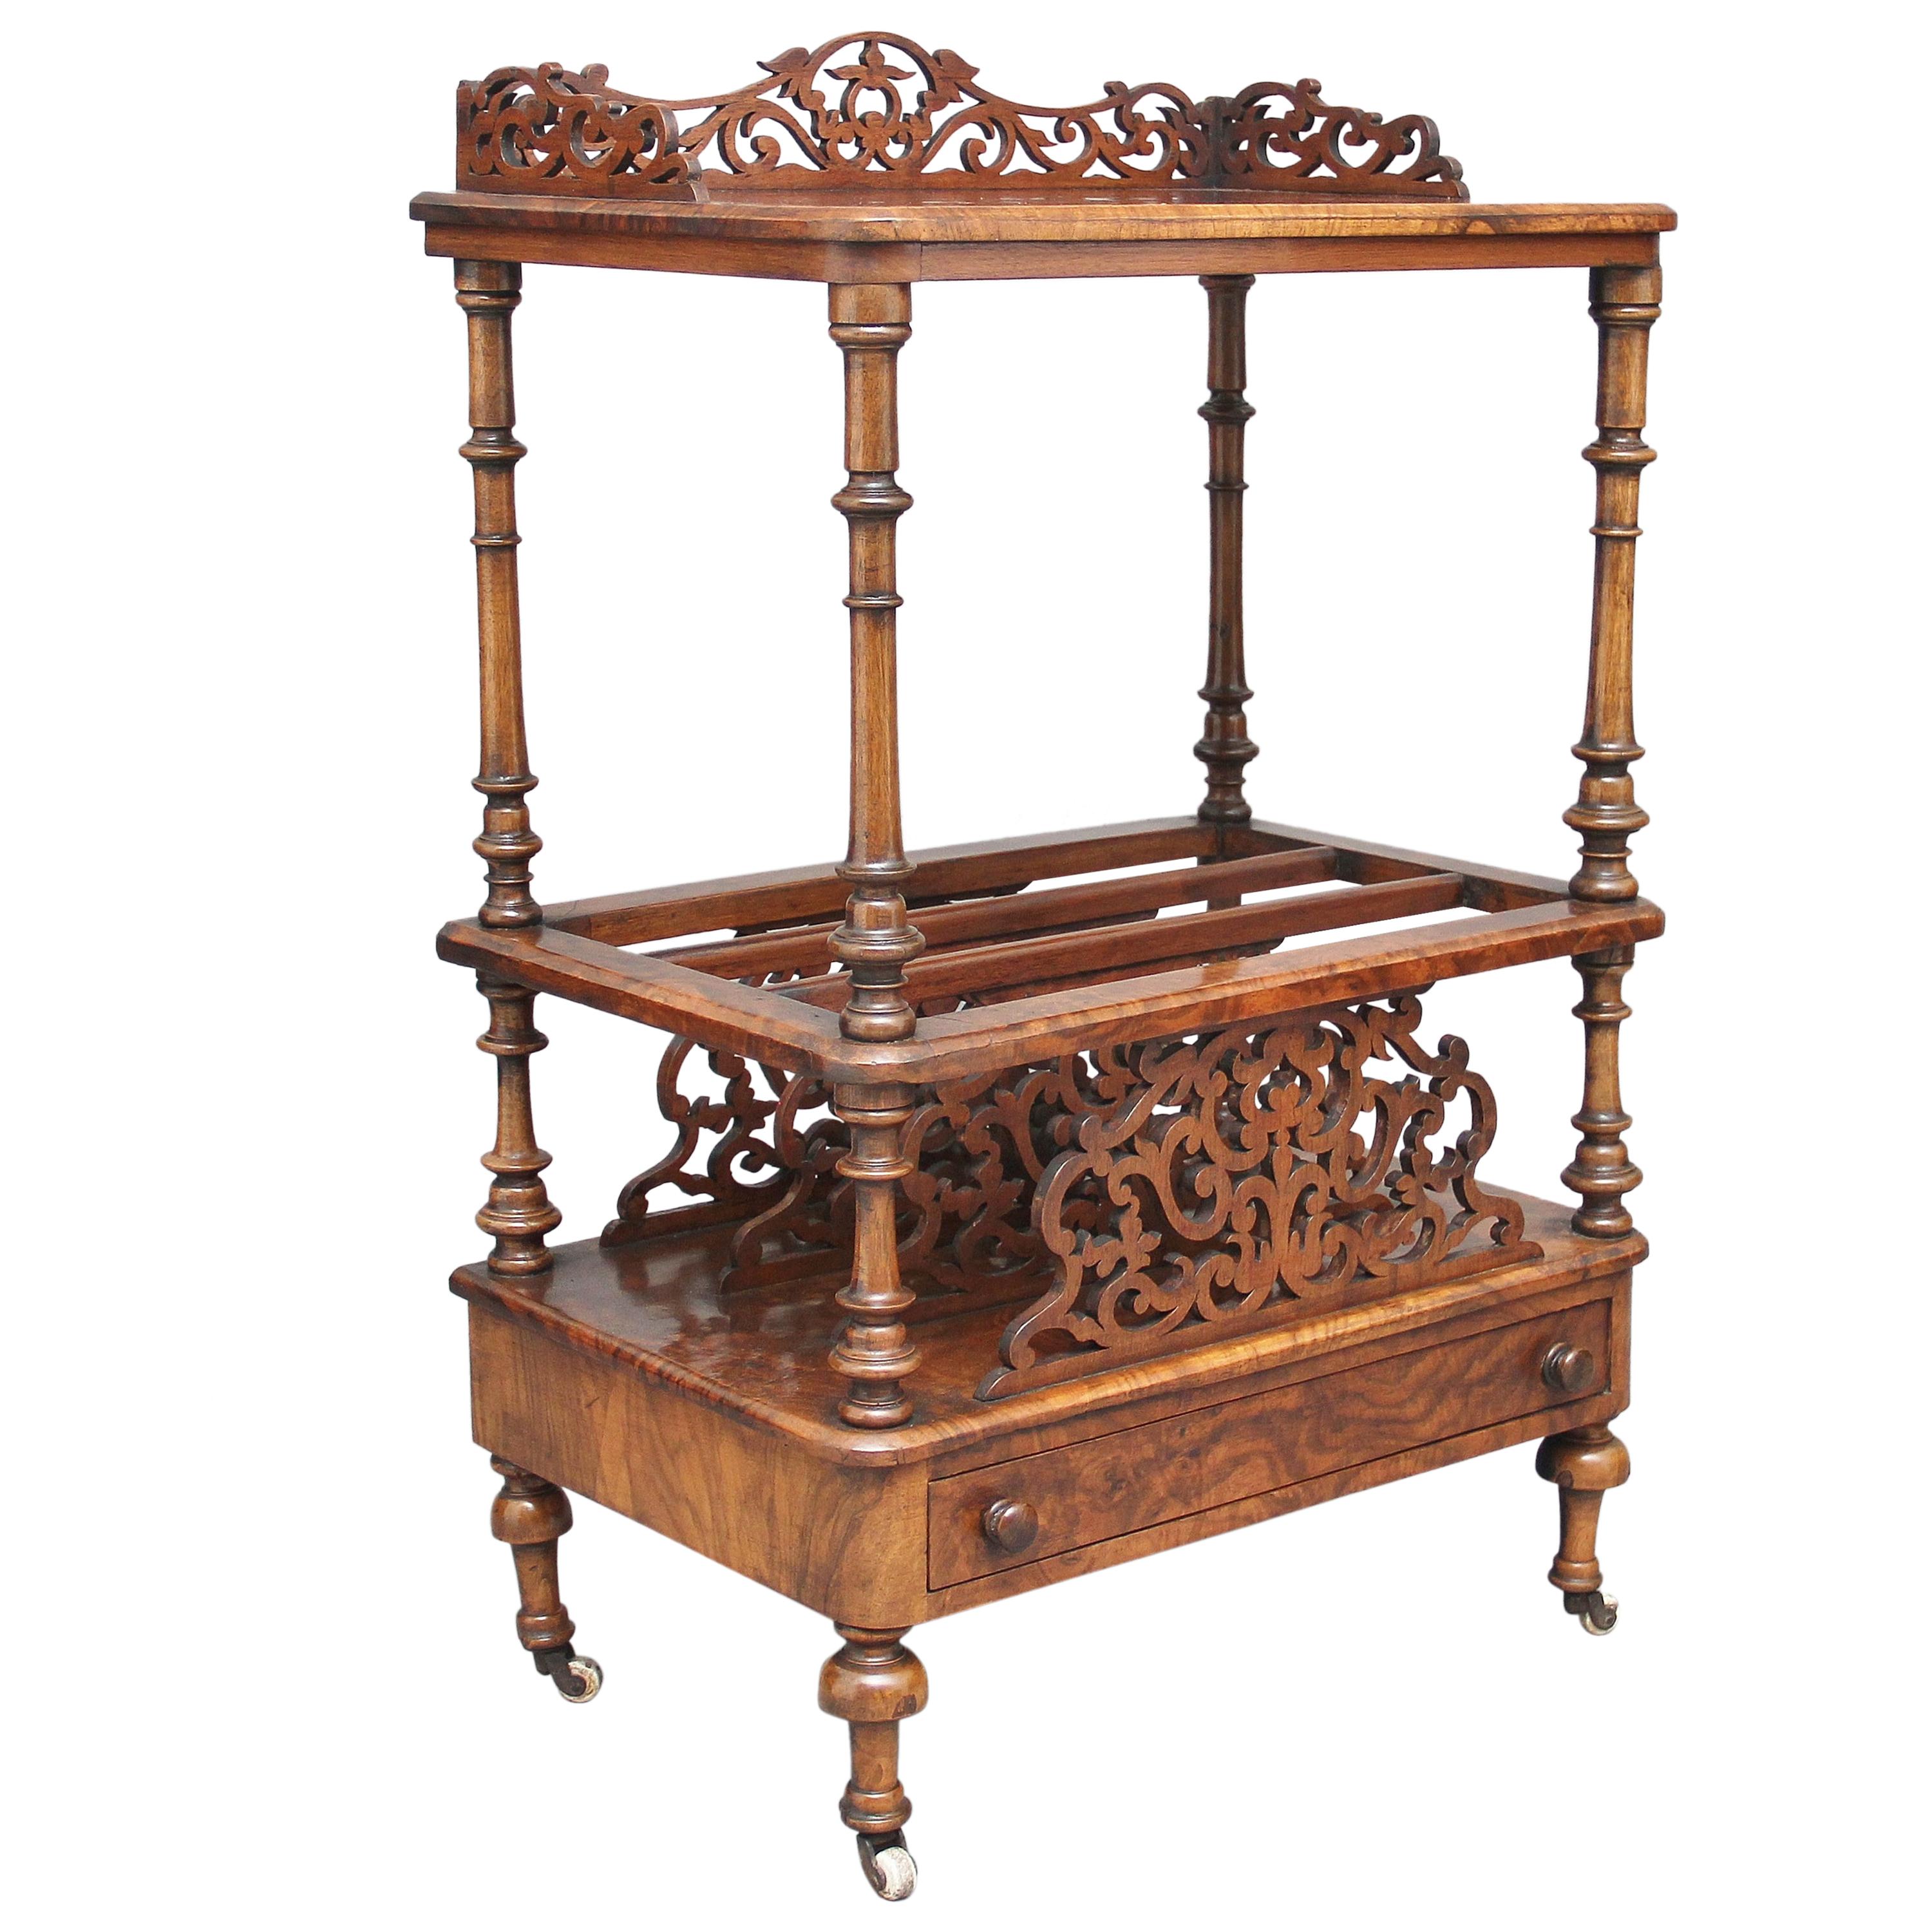 19th Century burr walnut Canterbury with a carved and pierced gallery